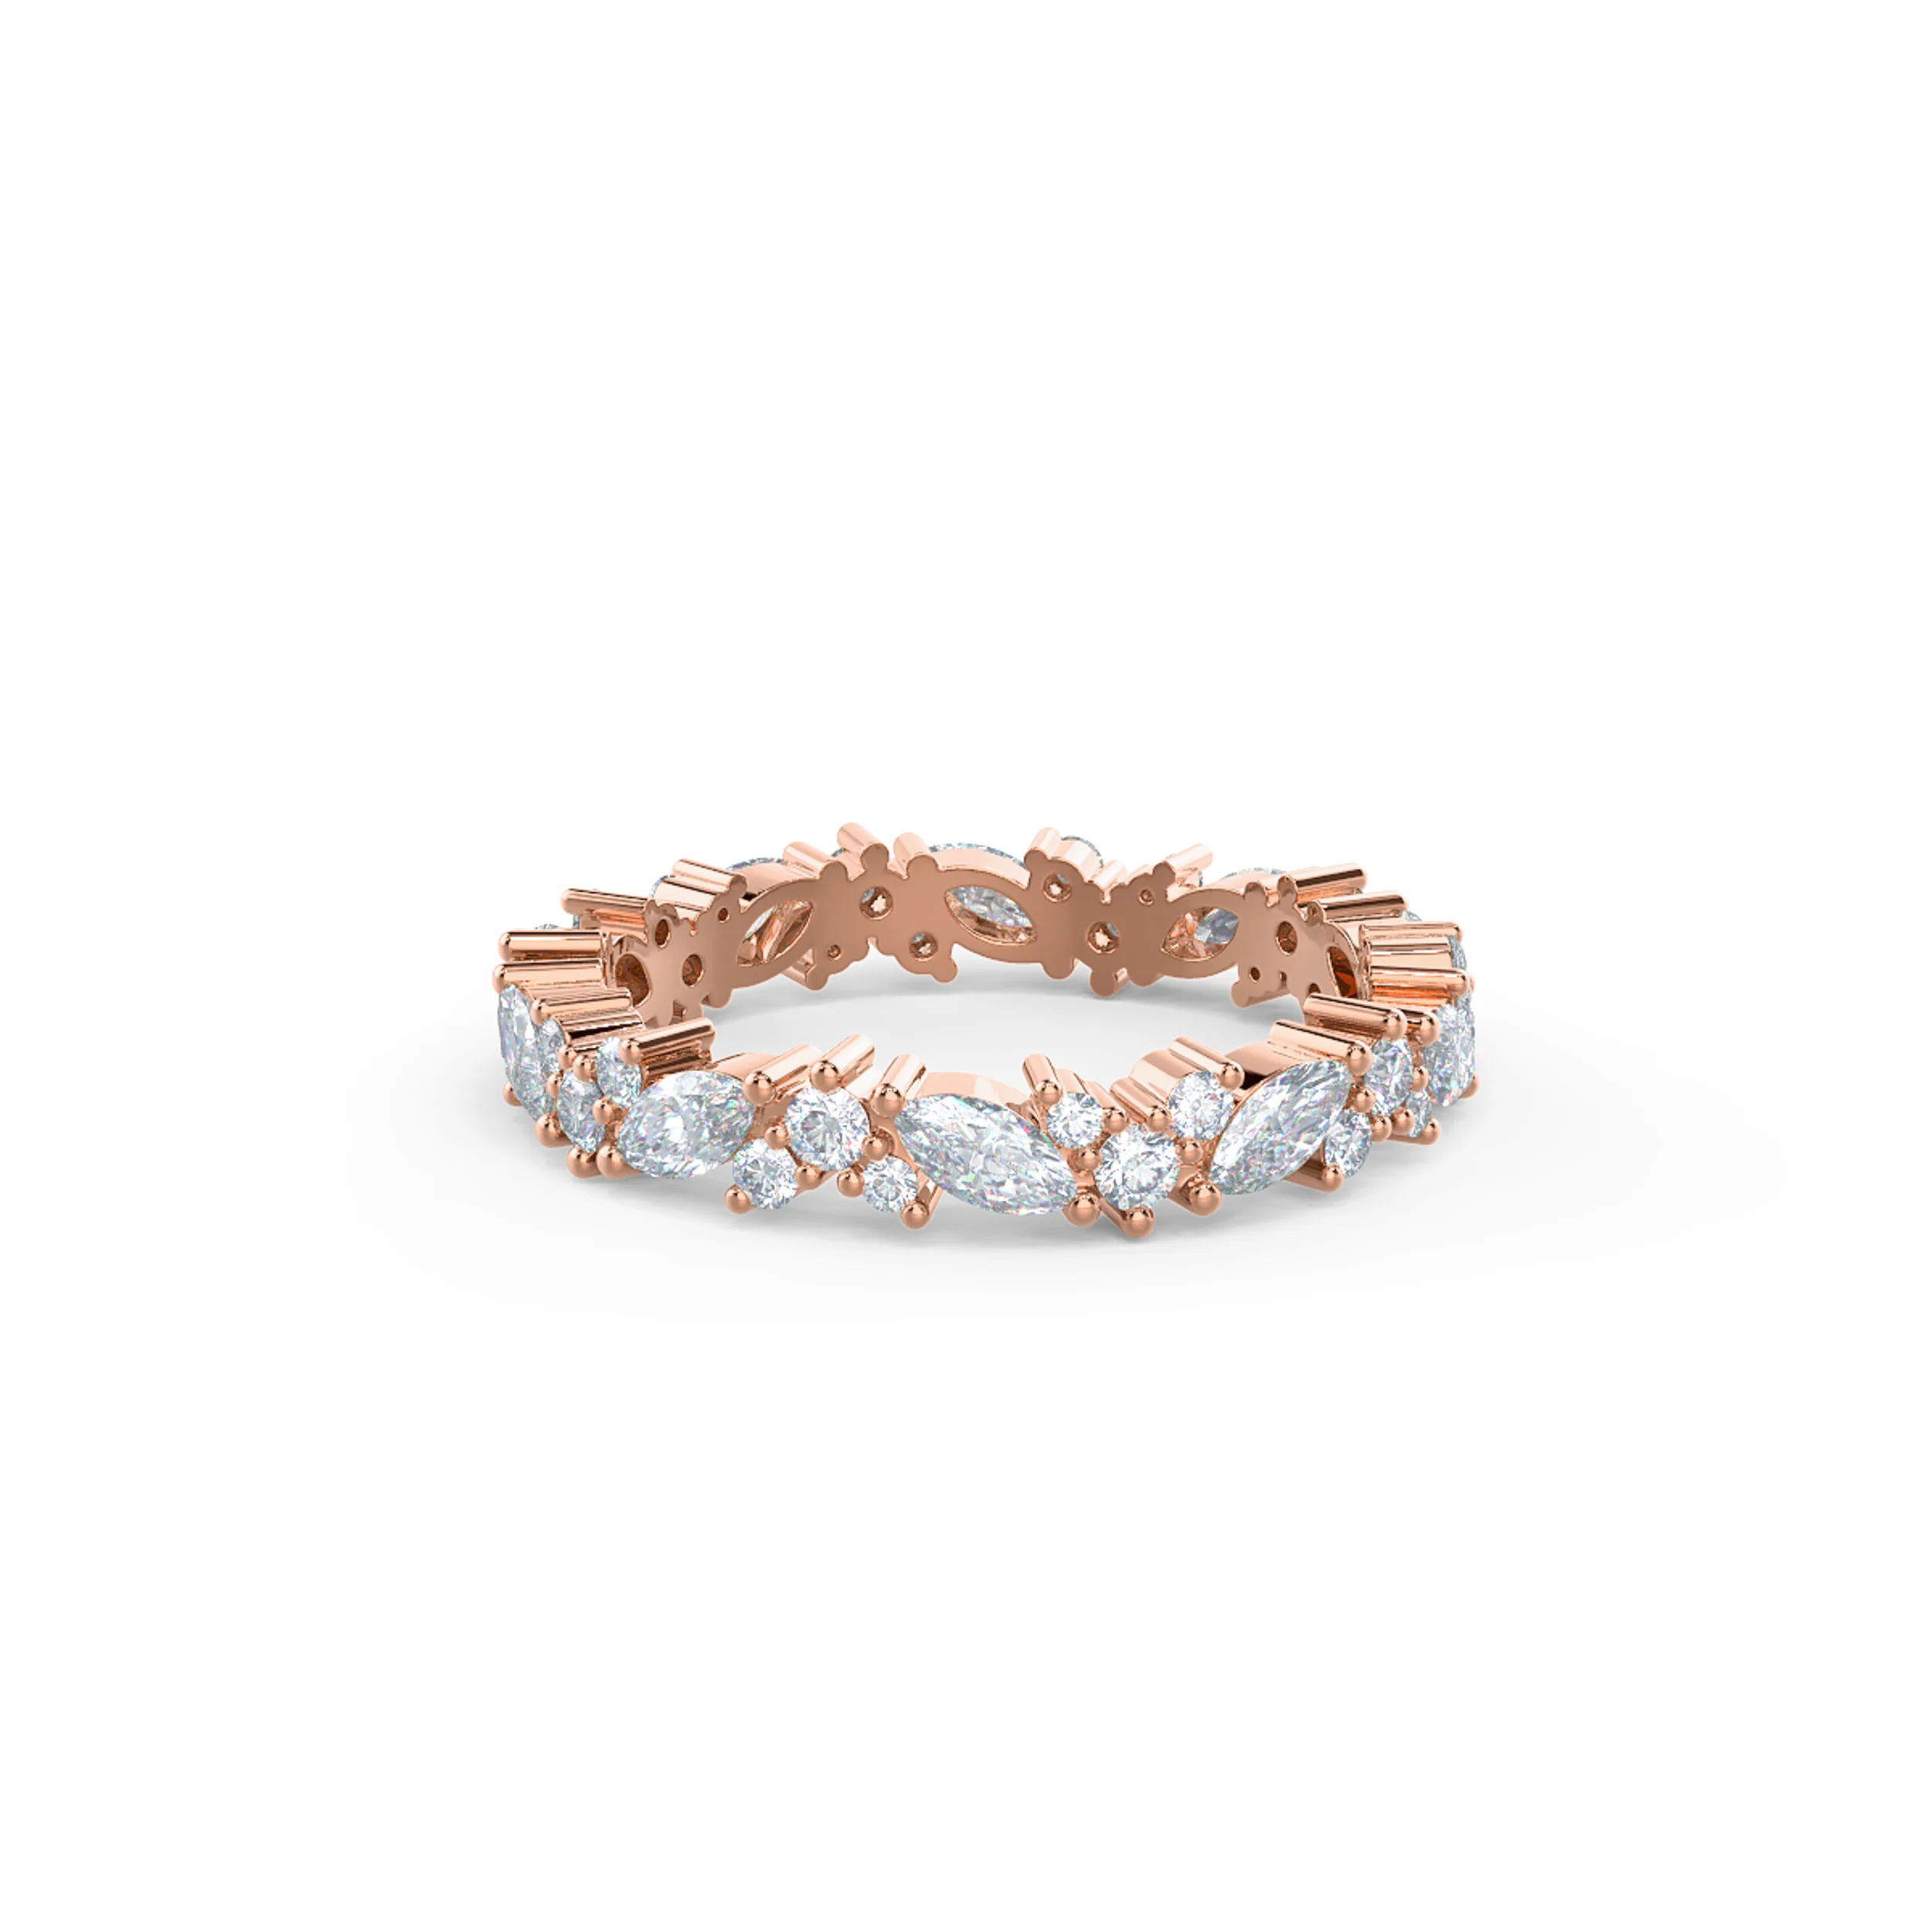 Exceptional Quality 1.35 ct Diamonds set in 14k Rose Gold Jessica Eternity Band (Main View)